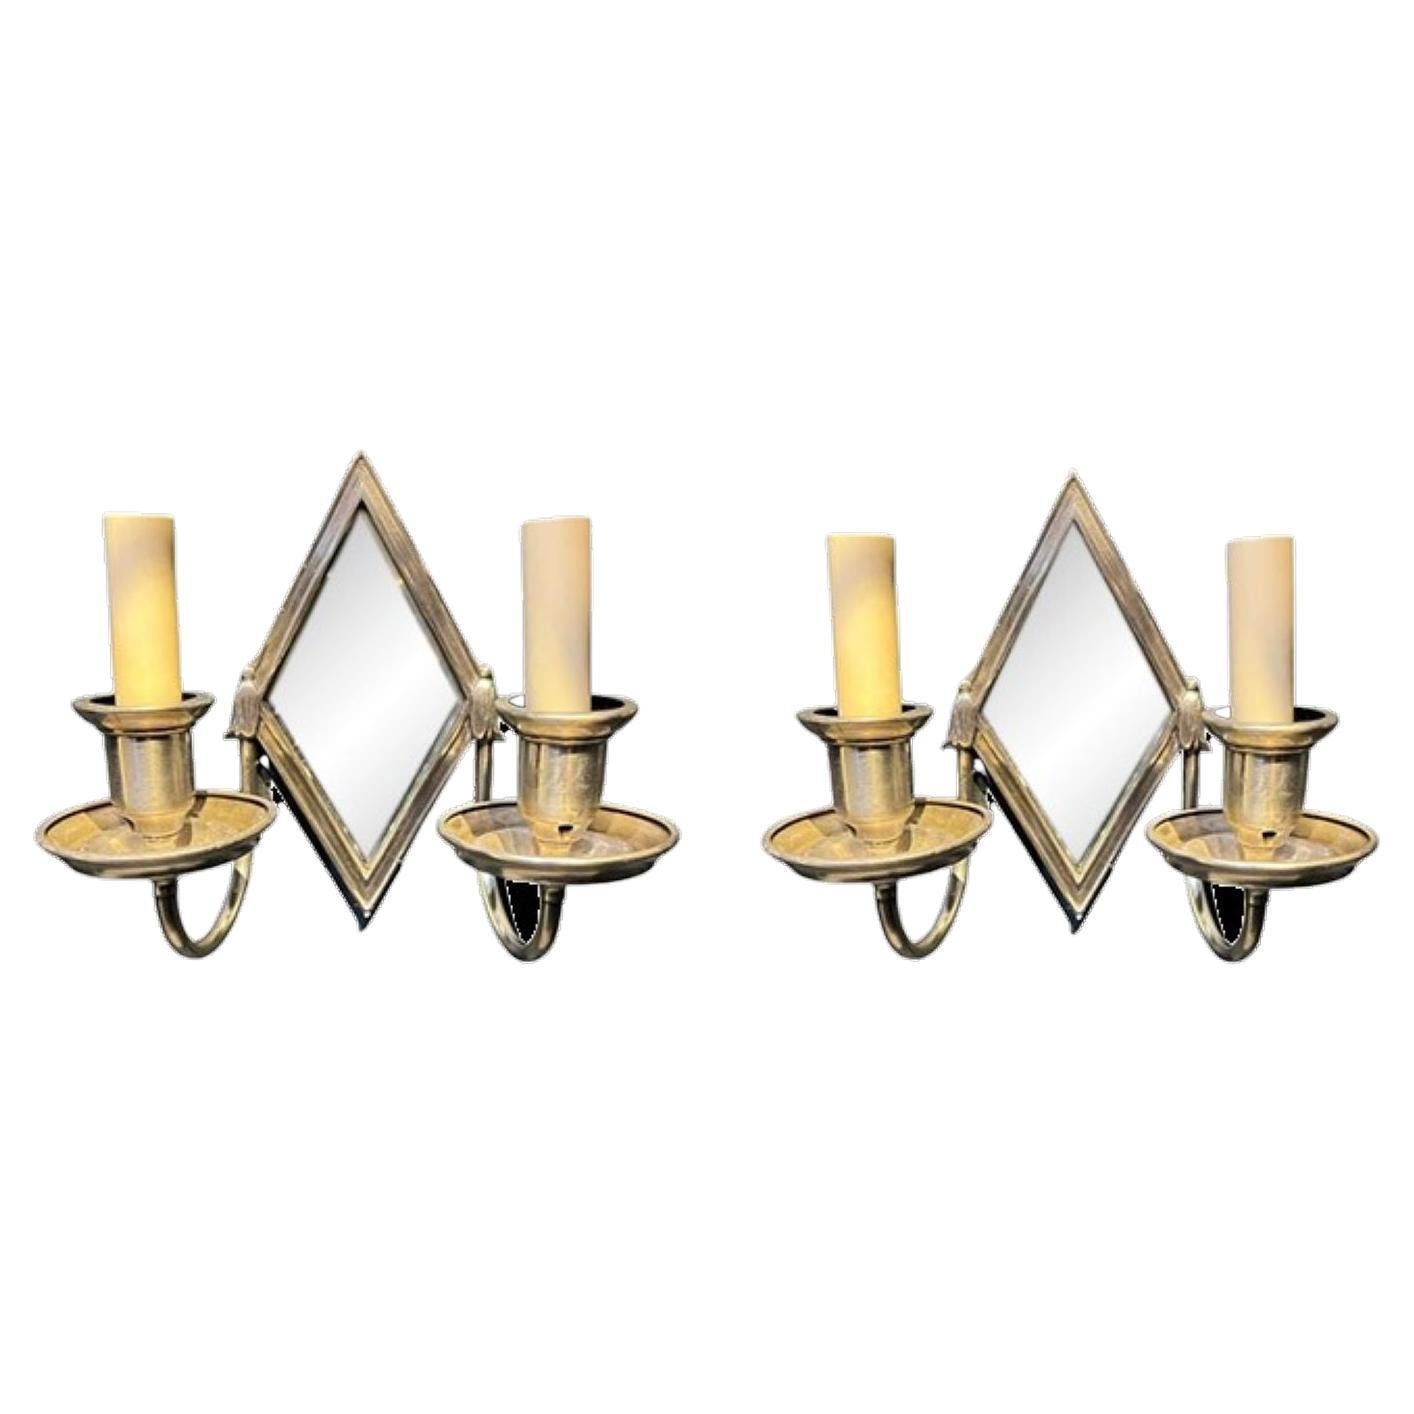 A pair of circa 1920 small Caldwell silver plated diamond shape sconces with mirrored backplate